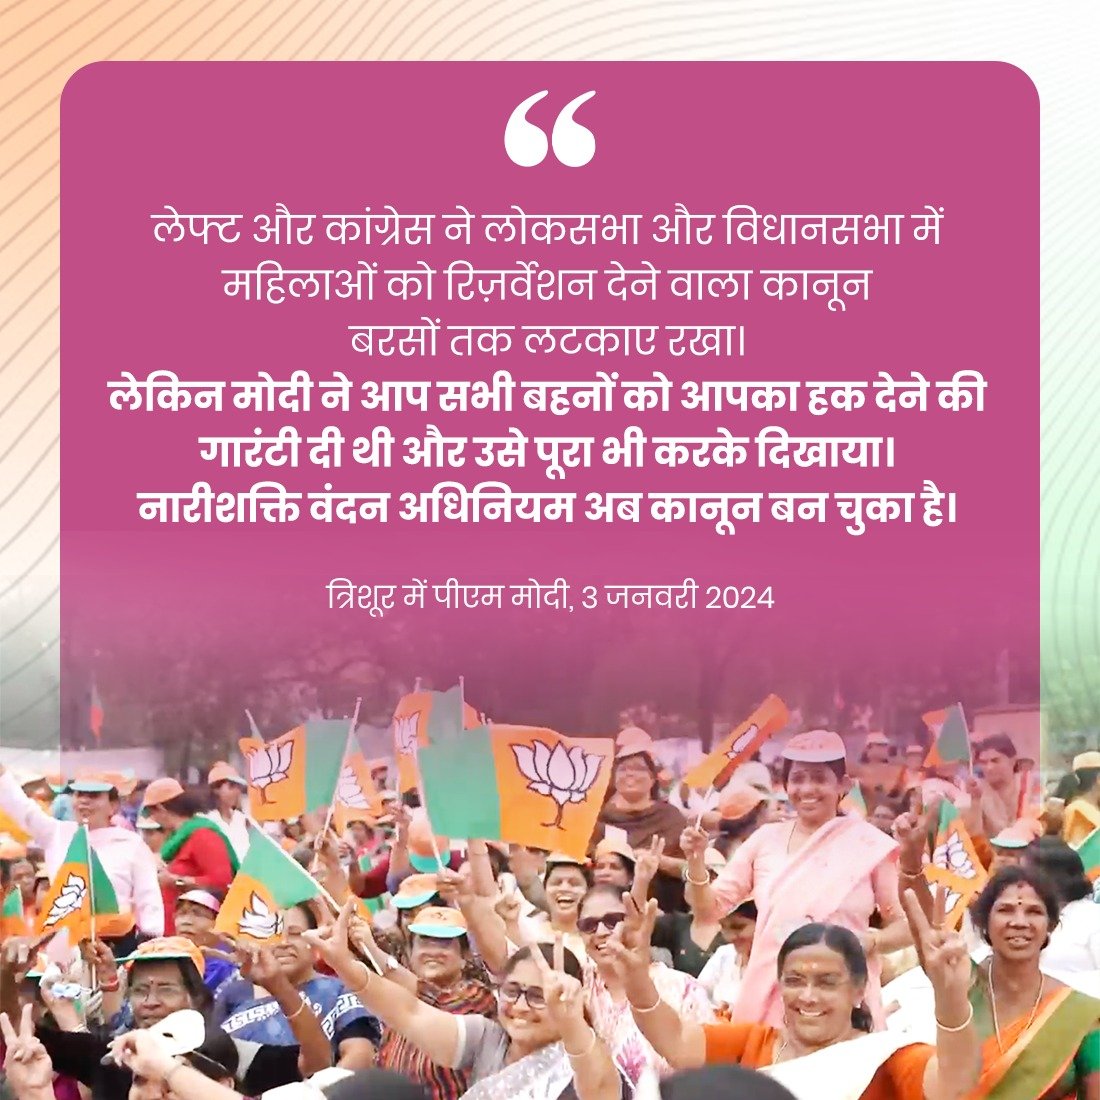 It is the Modi government that has brought the Narishakti Vandan Act, while the Left and Congress had been stalling the women's reservation in parliament for ages.